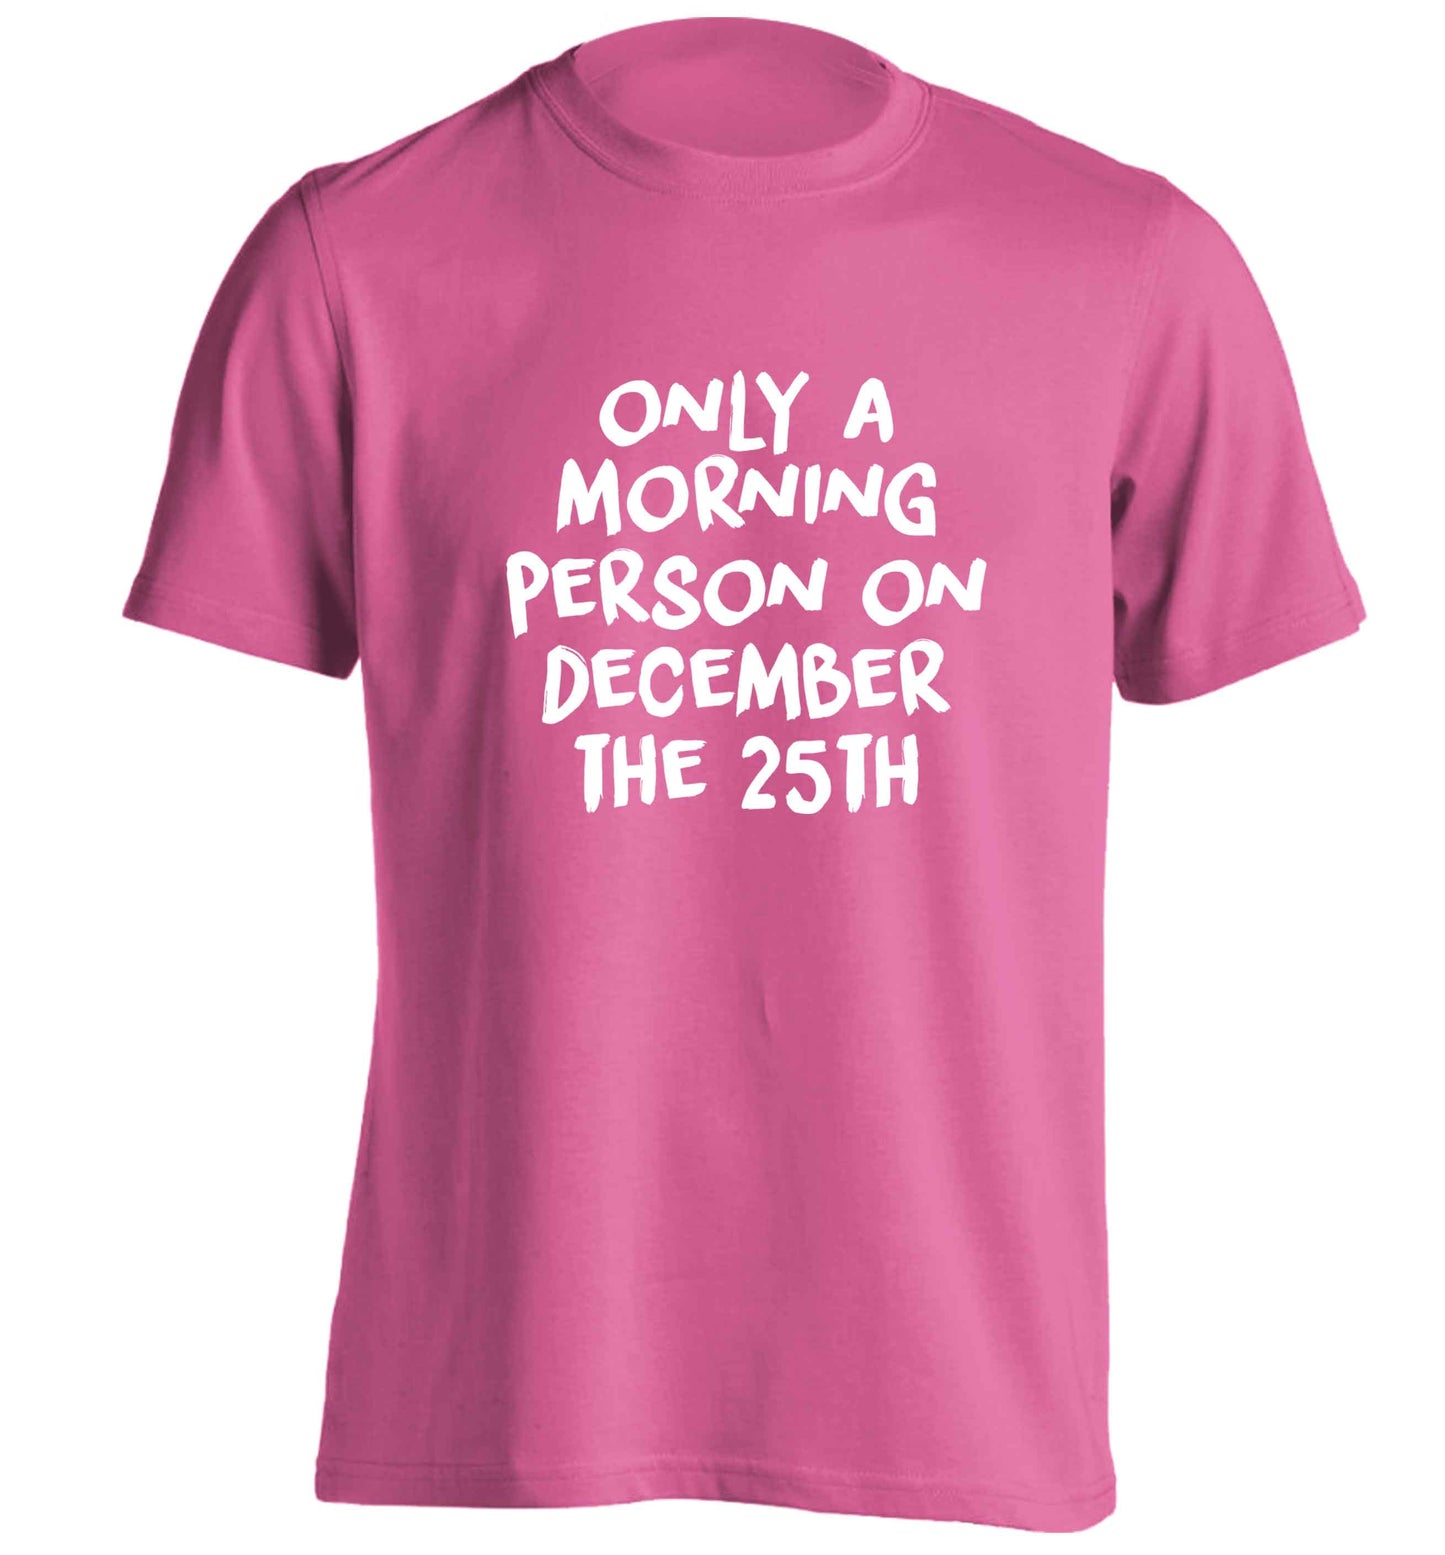 I'm only a morning person on December the 25th adults unisex pink Tshirt 2XL